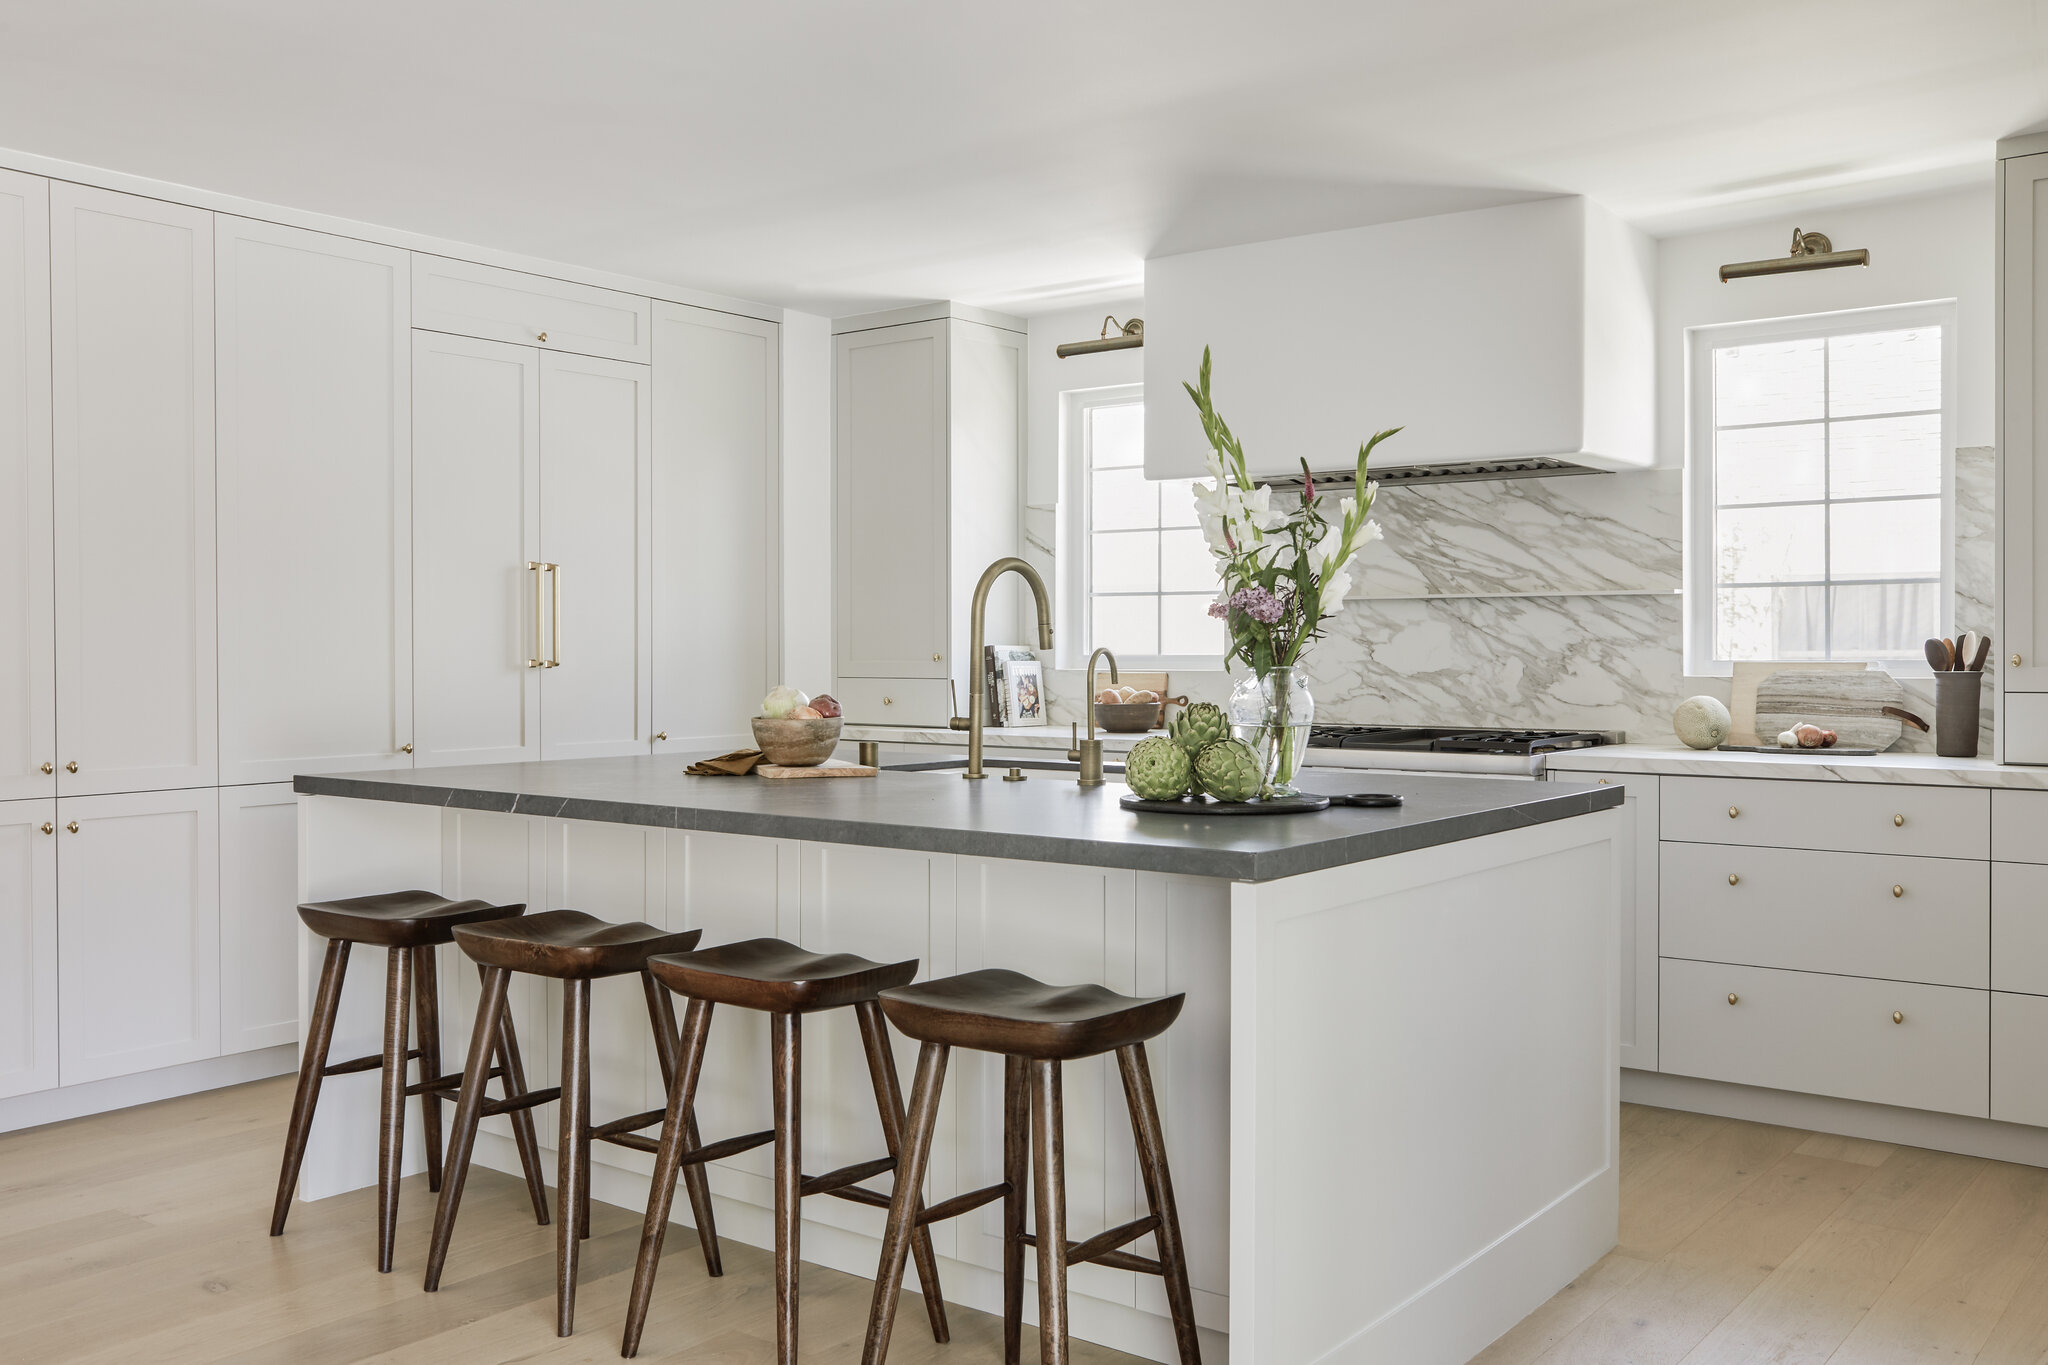 Two-tier kitchen islands are the future – 9 reasons why designers want you to invest now